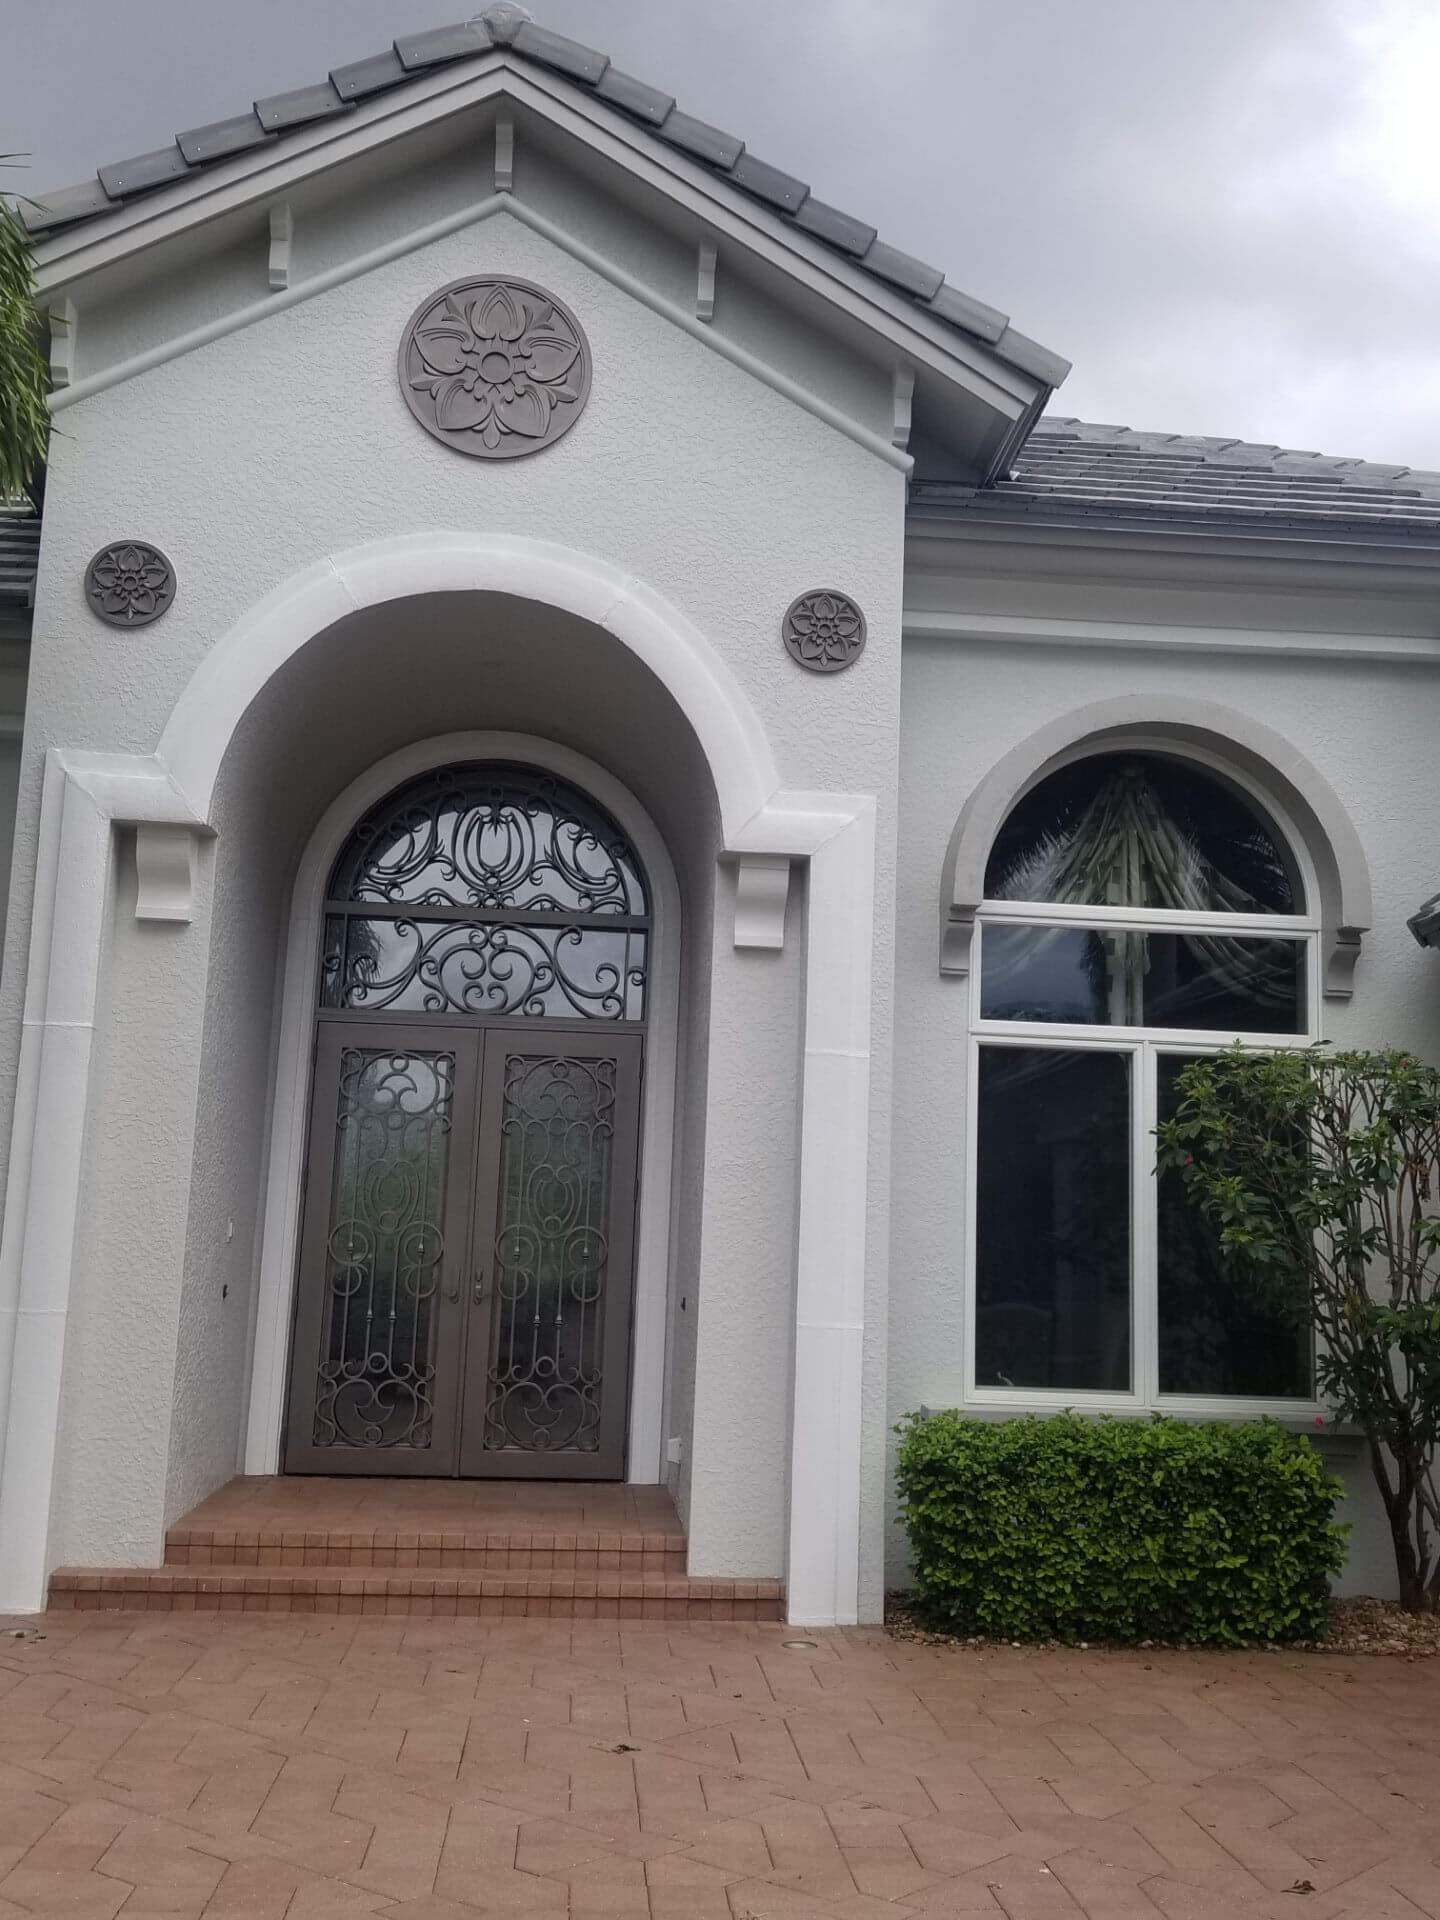 We not only painted the Cantera doors using metallic paint, we painted the 3 medallions with the same paint.